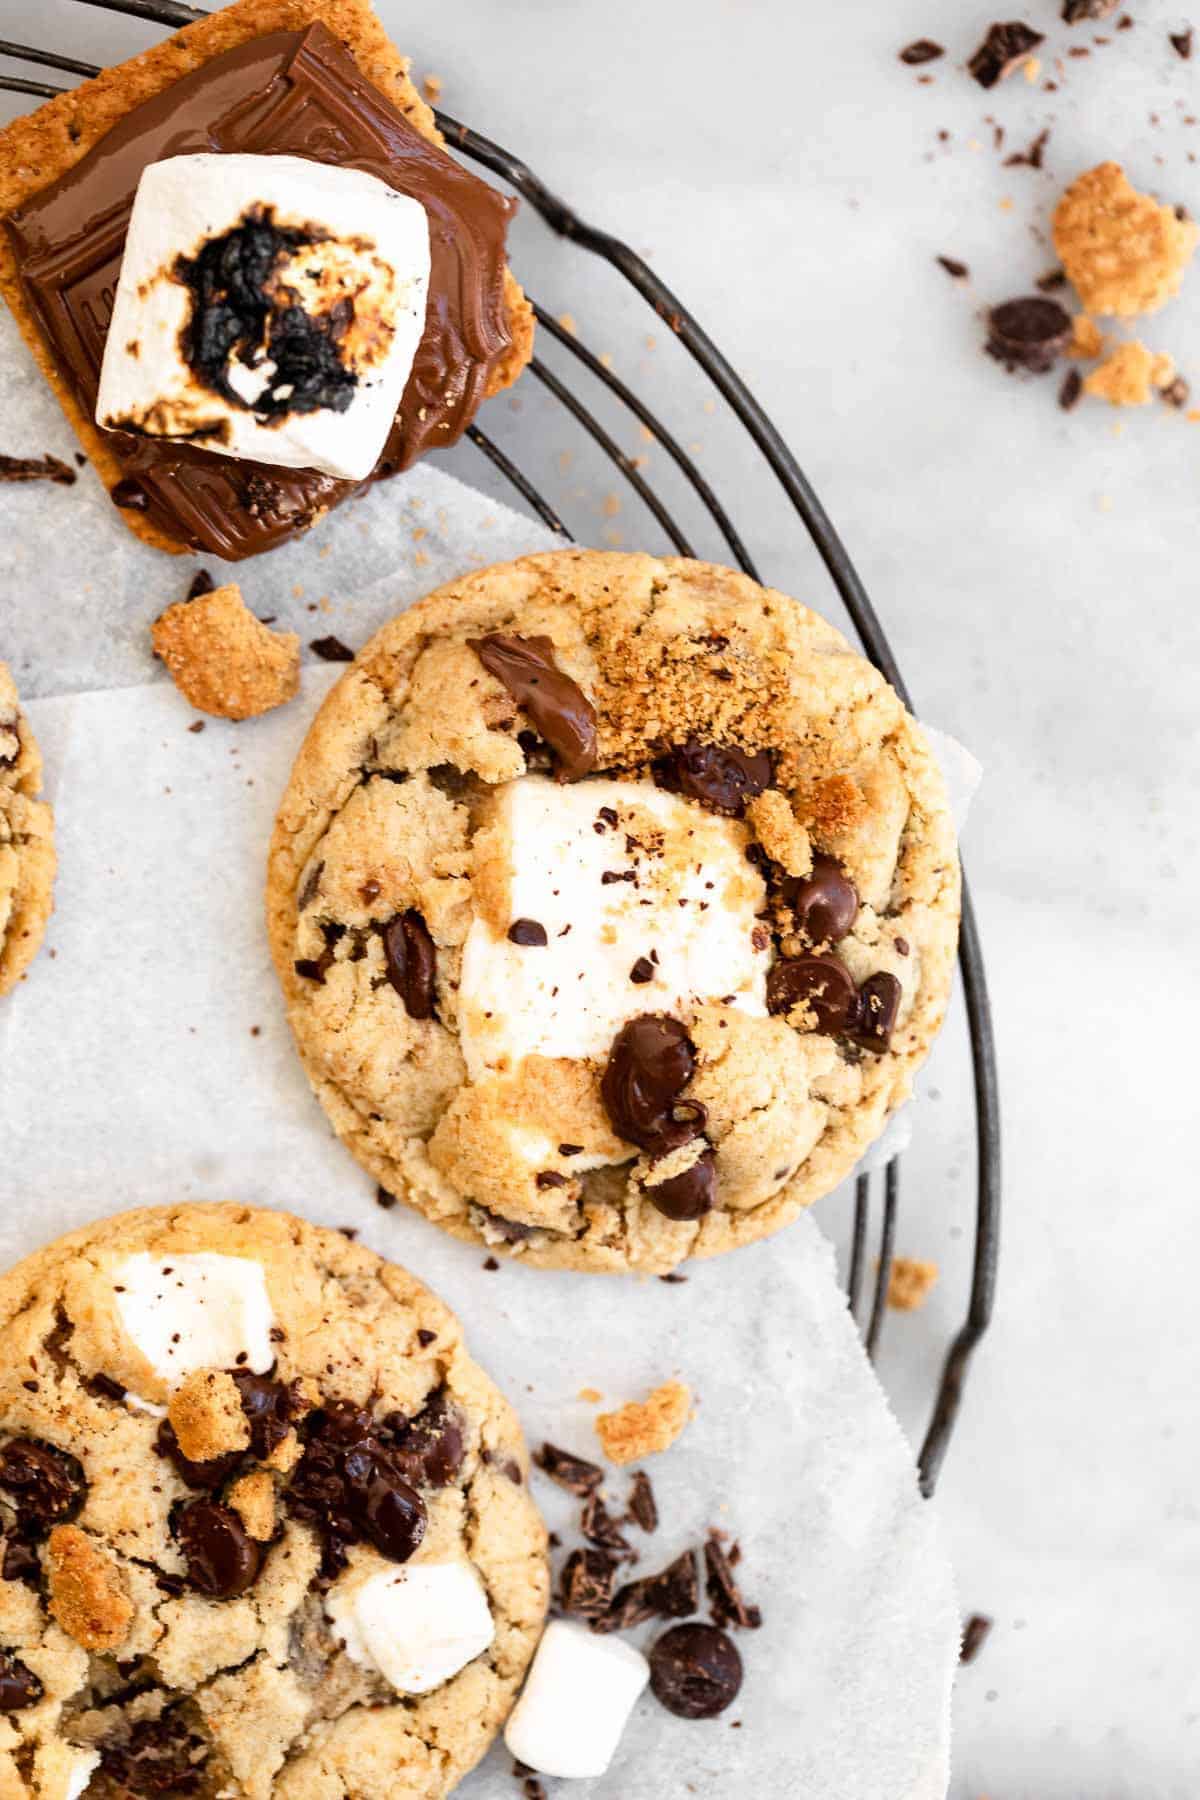 https://eatwithclarity.com/wp-content/uploads/2021/02/smores-marshmallow-cookies-3.jpg